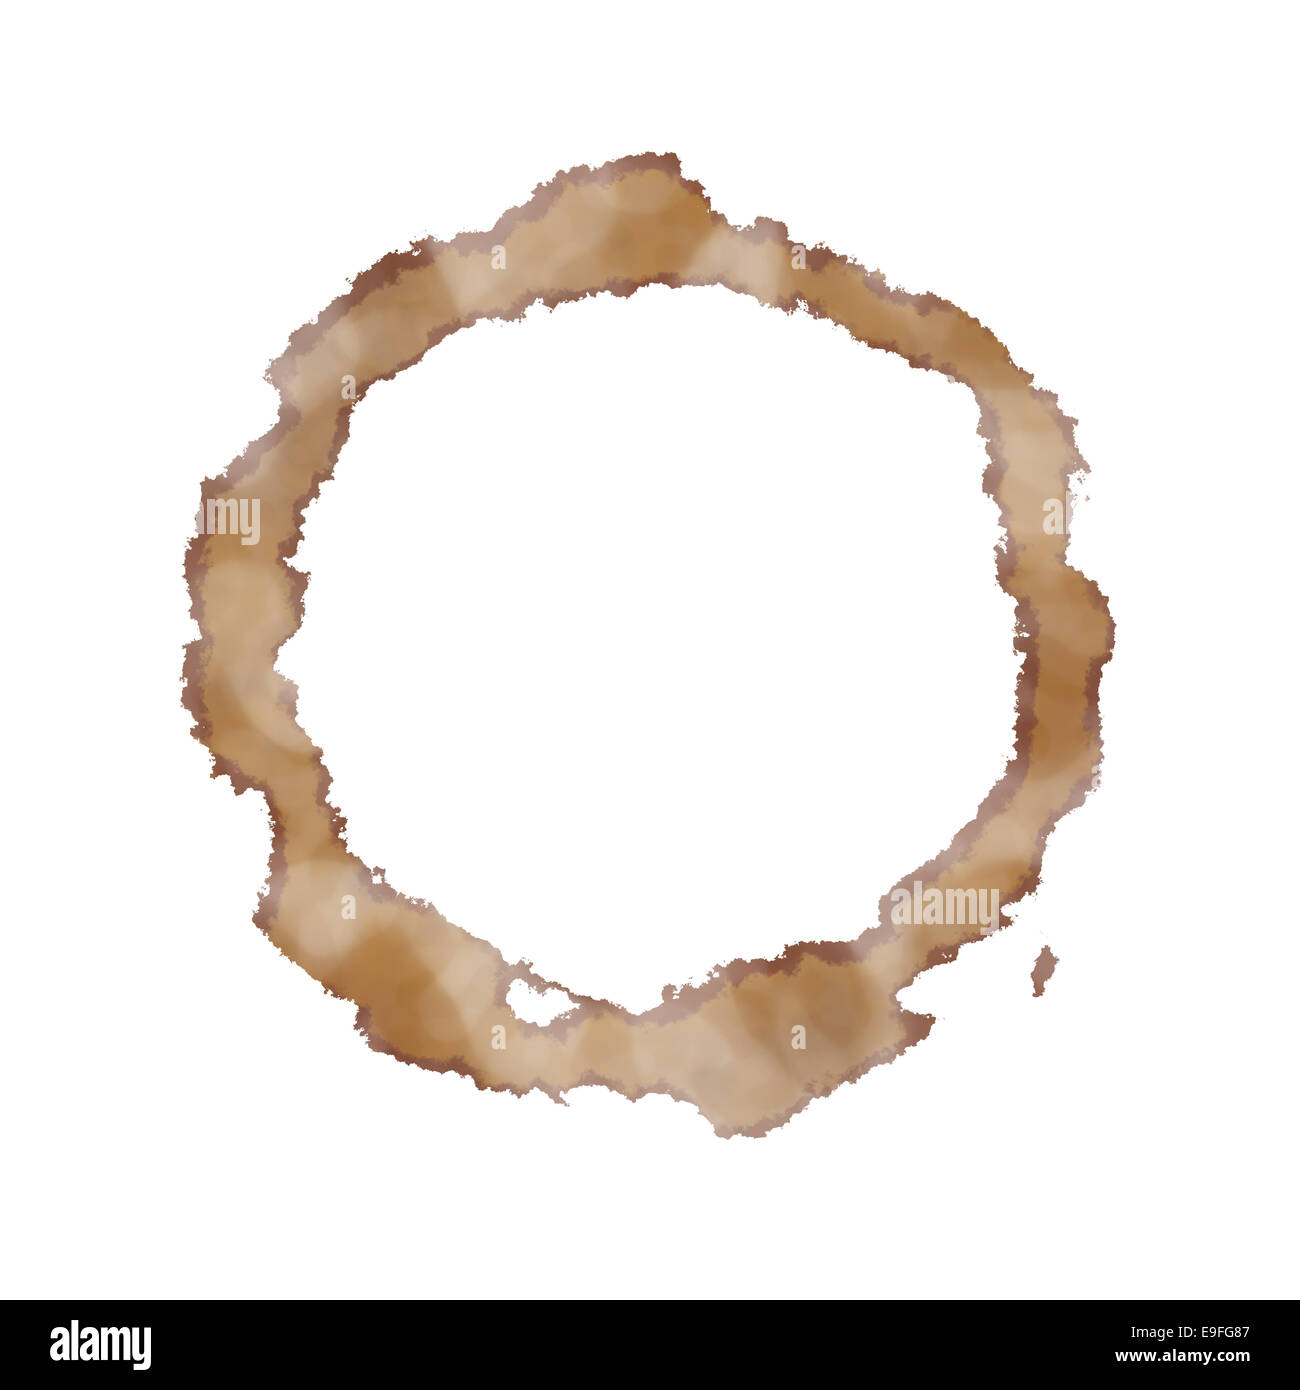 Coffe cup stain isolated Stock Photo